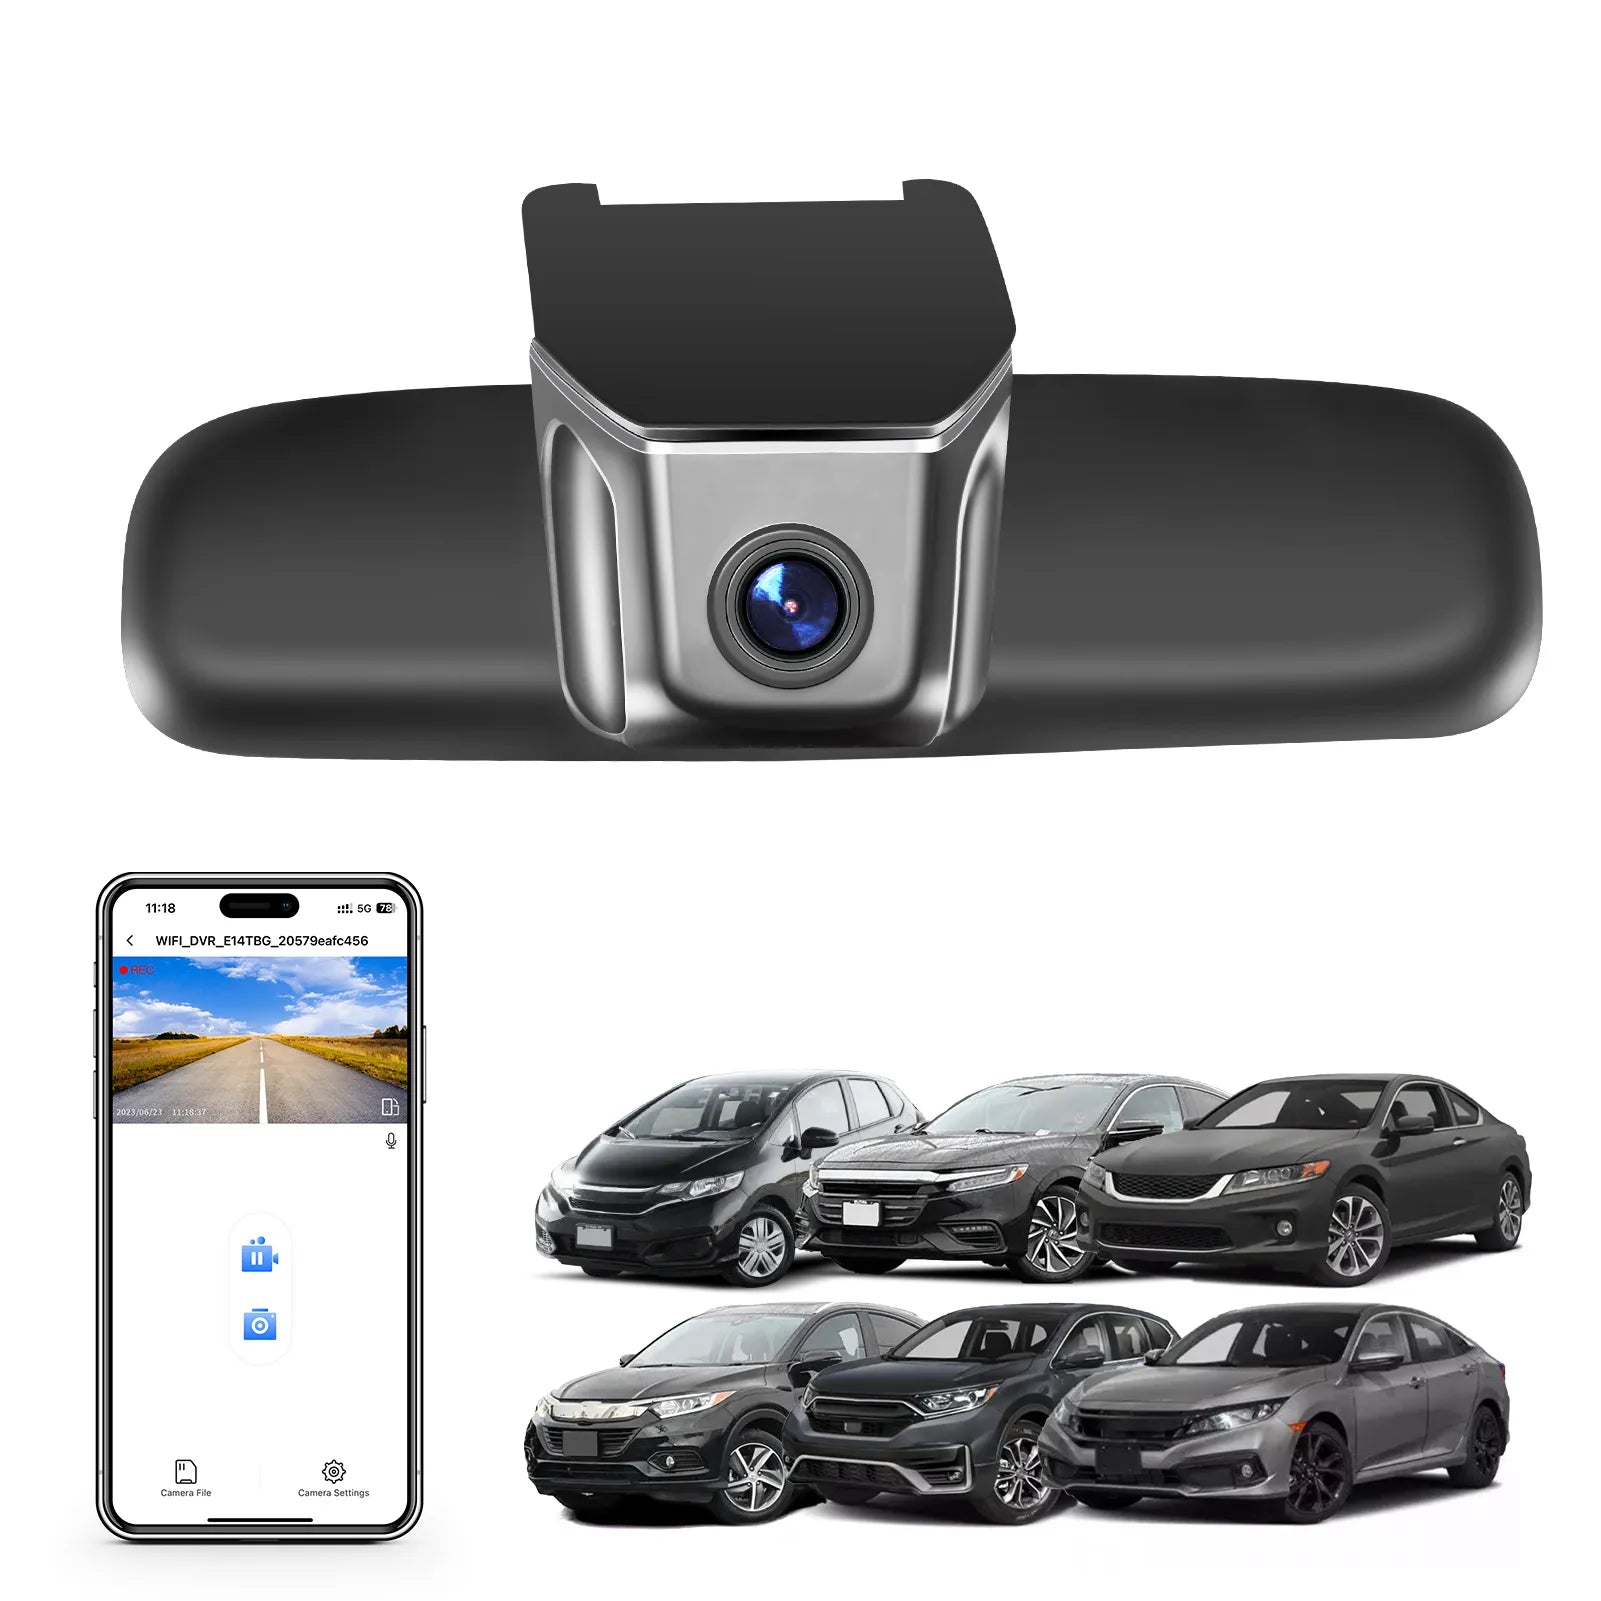 4K Dash Cam Custom fit for Honda CRV 2007-2022, Civic 2009-2021, Accord 2008-2022, HRV 2016-2022 and More(More Vehicle Service Type in The 1st Bullet Point), WiFi & App, 64GB Card(Model B)